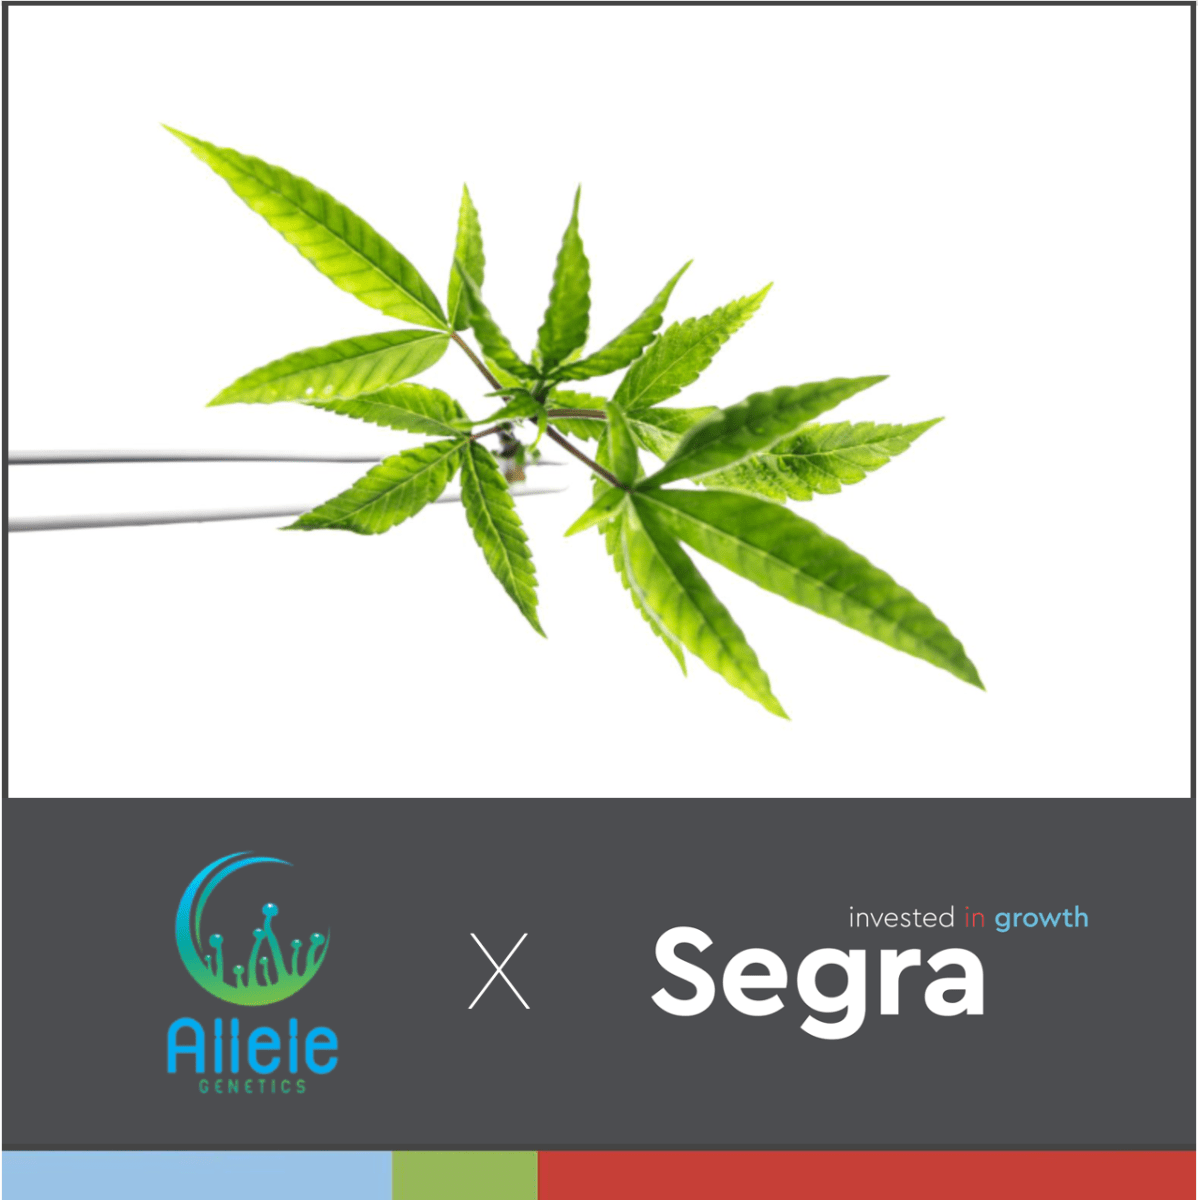 Segra Enters Agreement to Offer Allele’s Proven Cannabis Cultivar Collection Across Canada and the International Markets